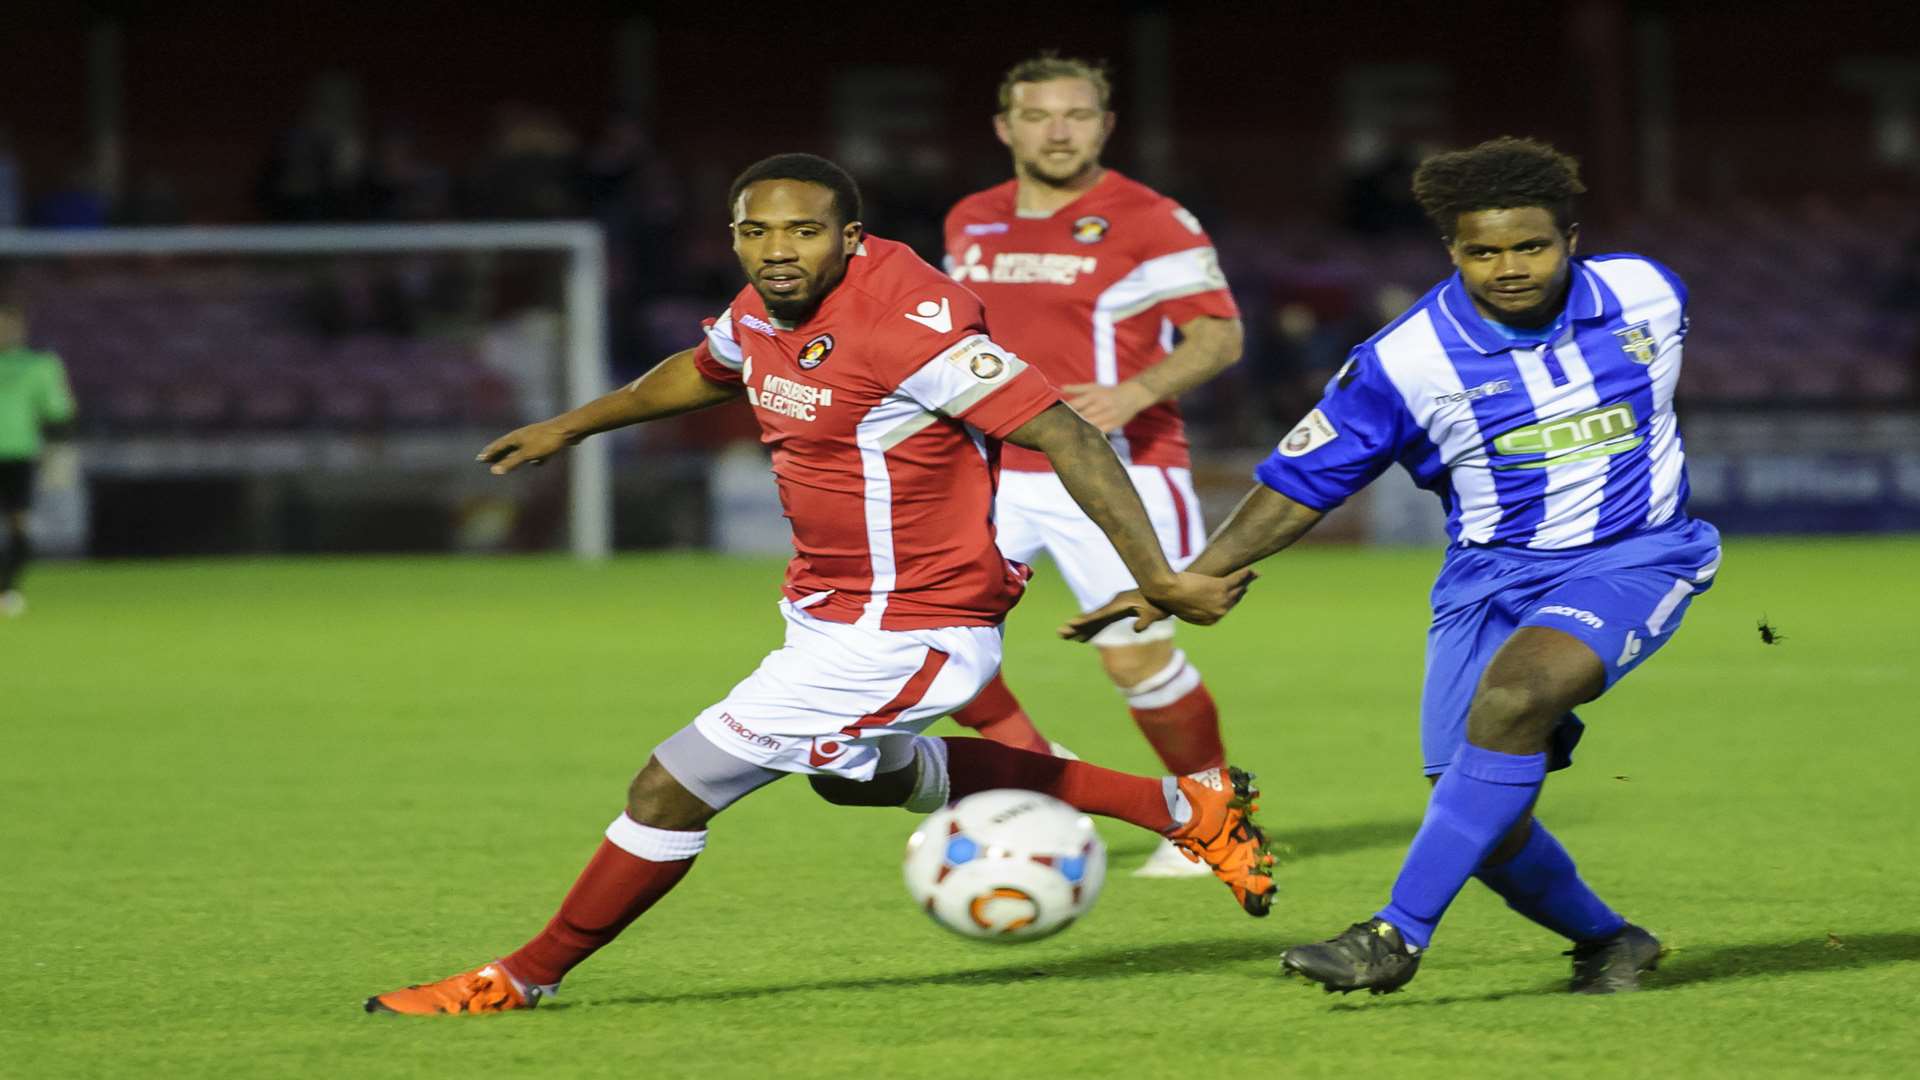 Aiden Palmer's only appearance for Ebbsfleet this season was against Bishop's Stortford Picture: Andy Payton